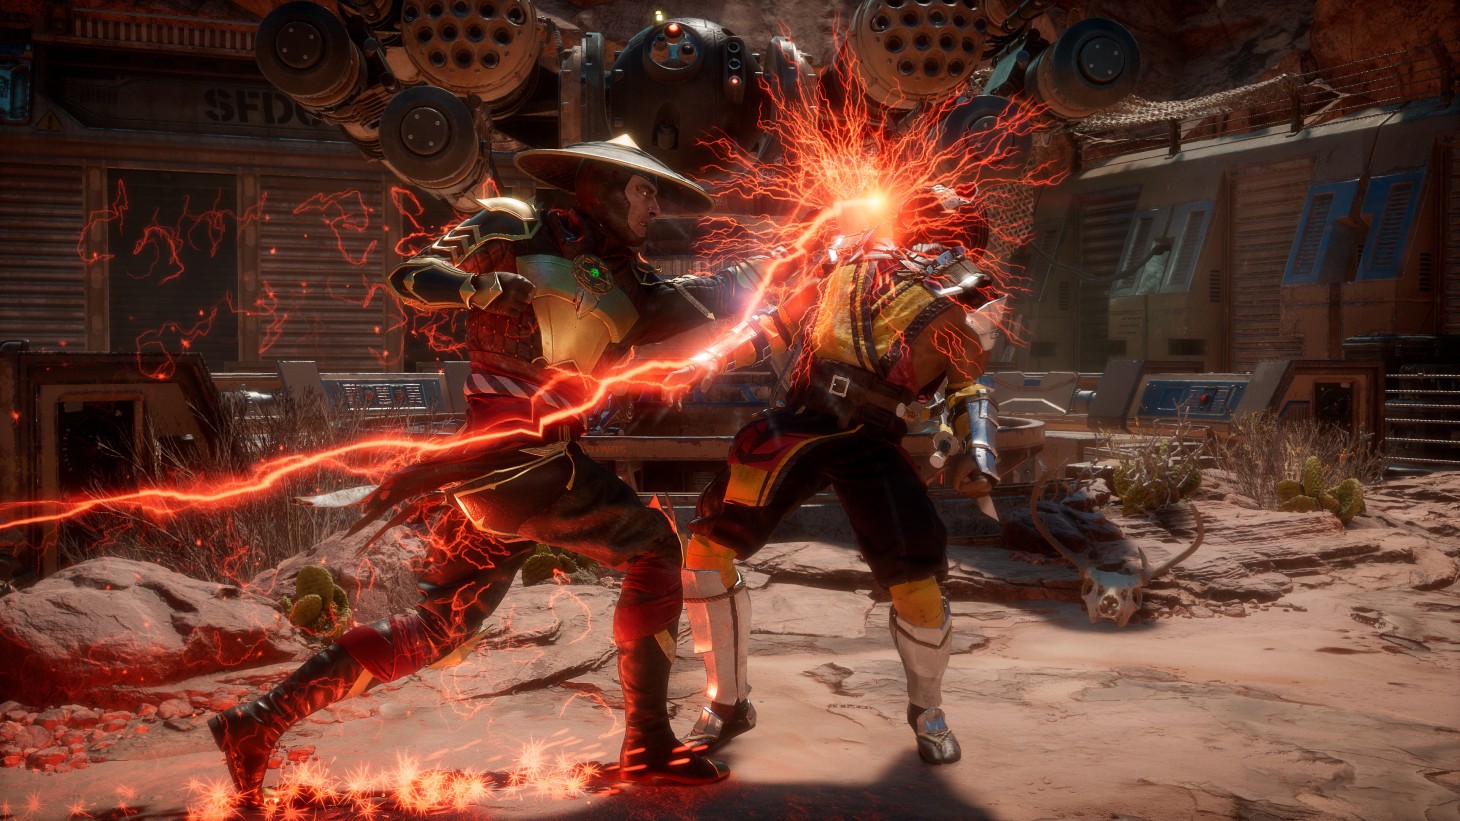 Aftermath Is A Mortal Kombat 11 Expansion That Adds A New Story And More  Characters - Game Informer